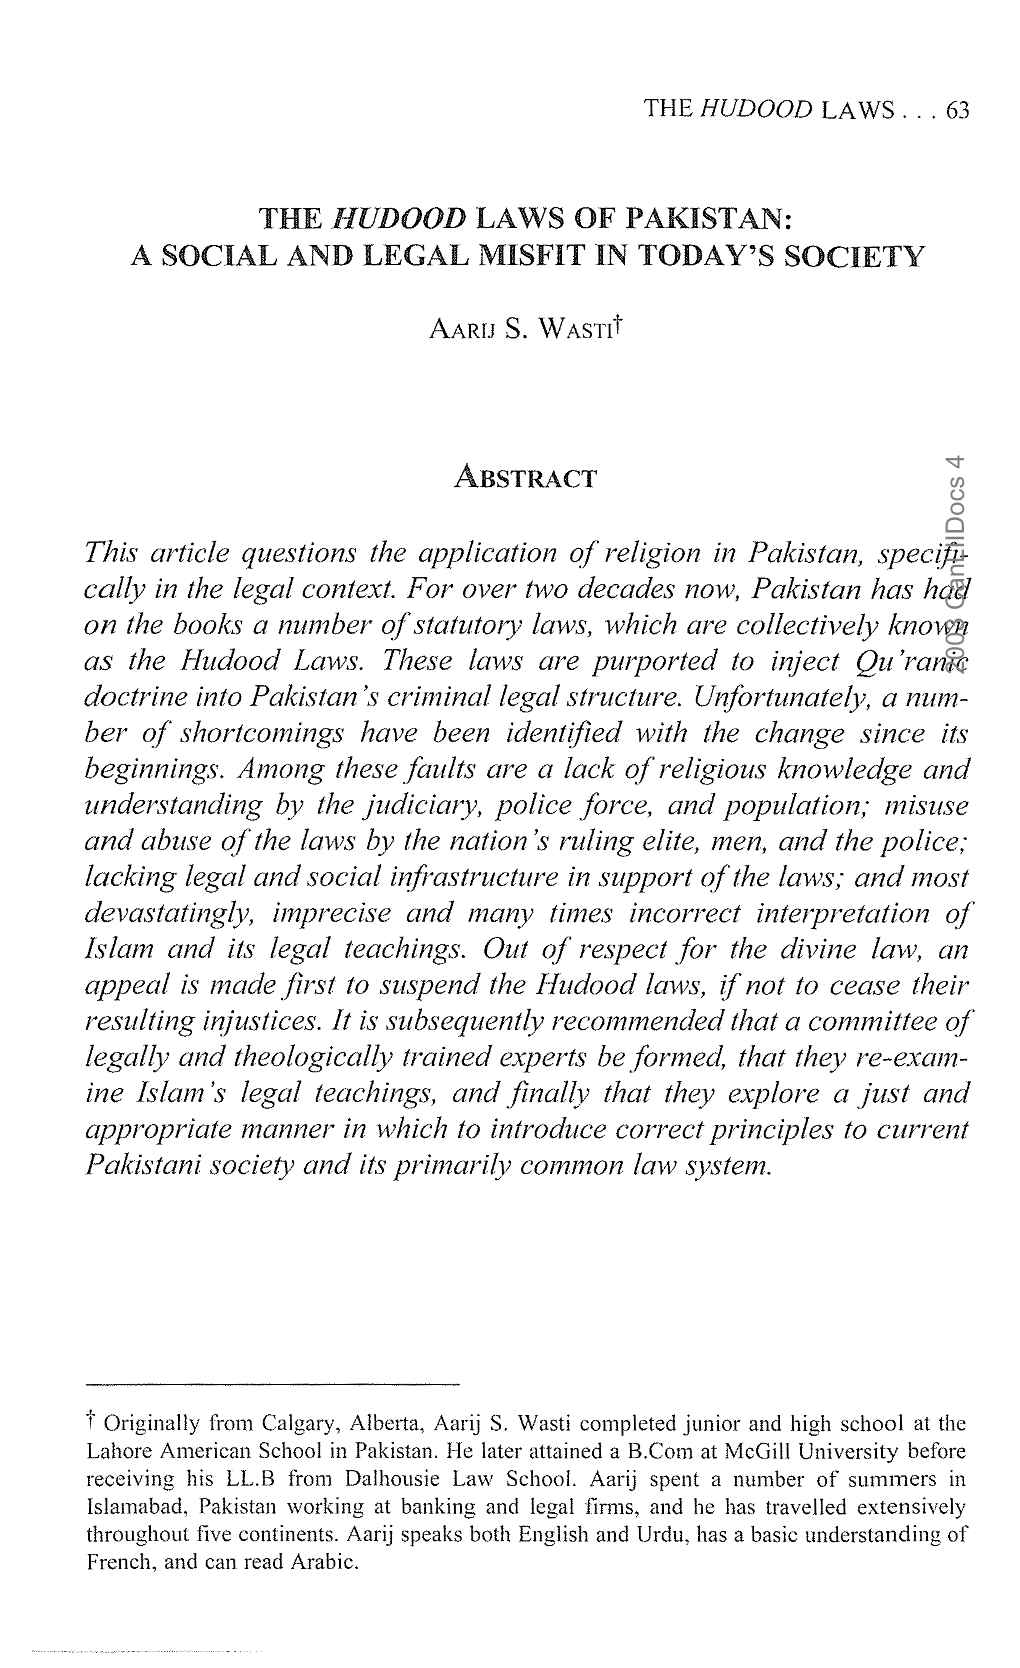 The Hudood Laws of Pakistan: a Social and Legal Misfit in Toda Y's Society